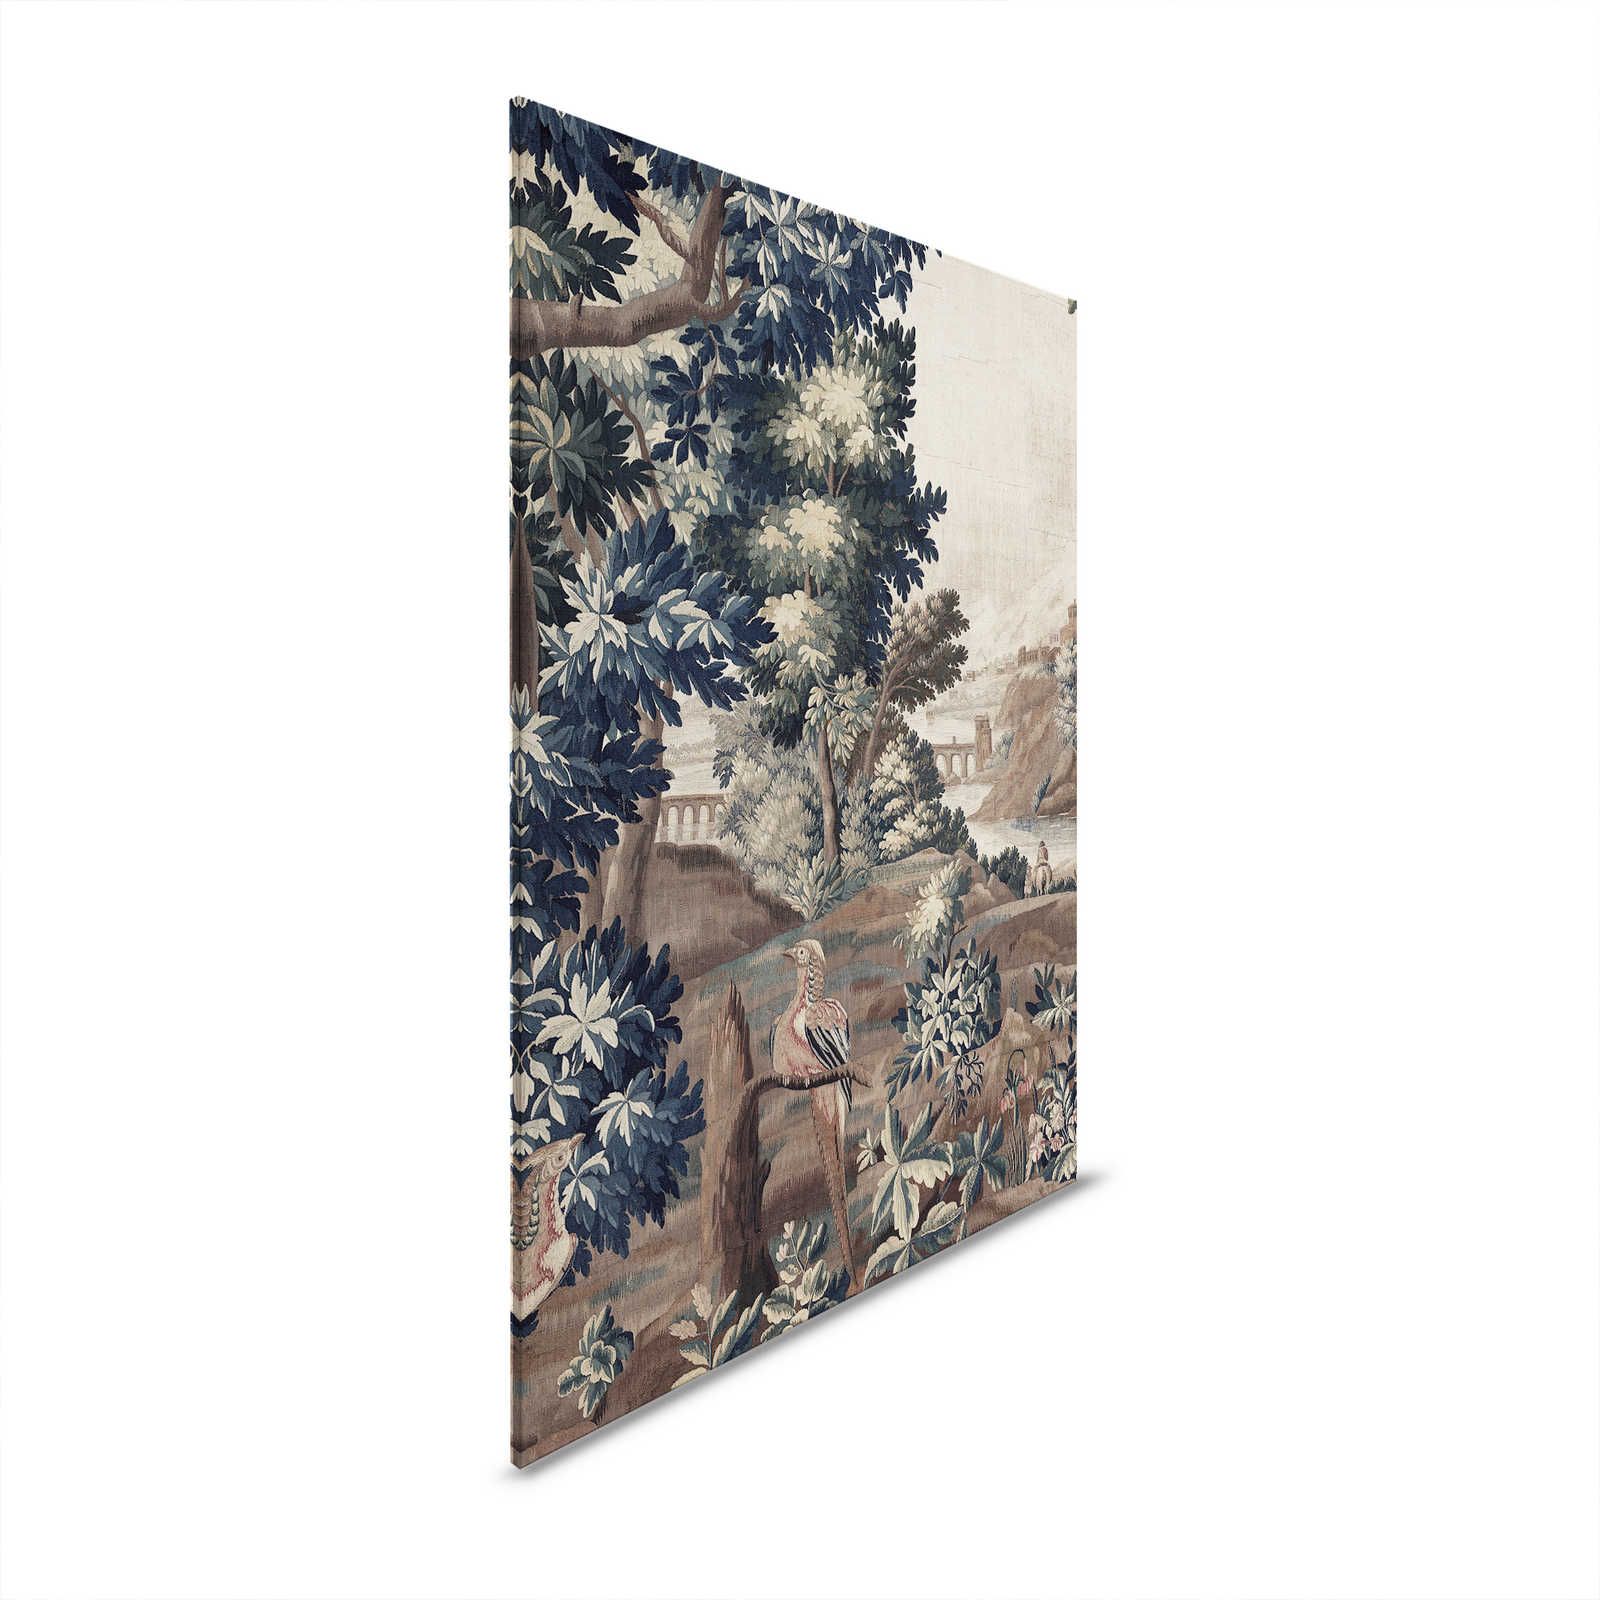 Gobelin Gallery 2 - Canvas painting tapestry classic art style - 0,90 m x 0,60 m
